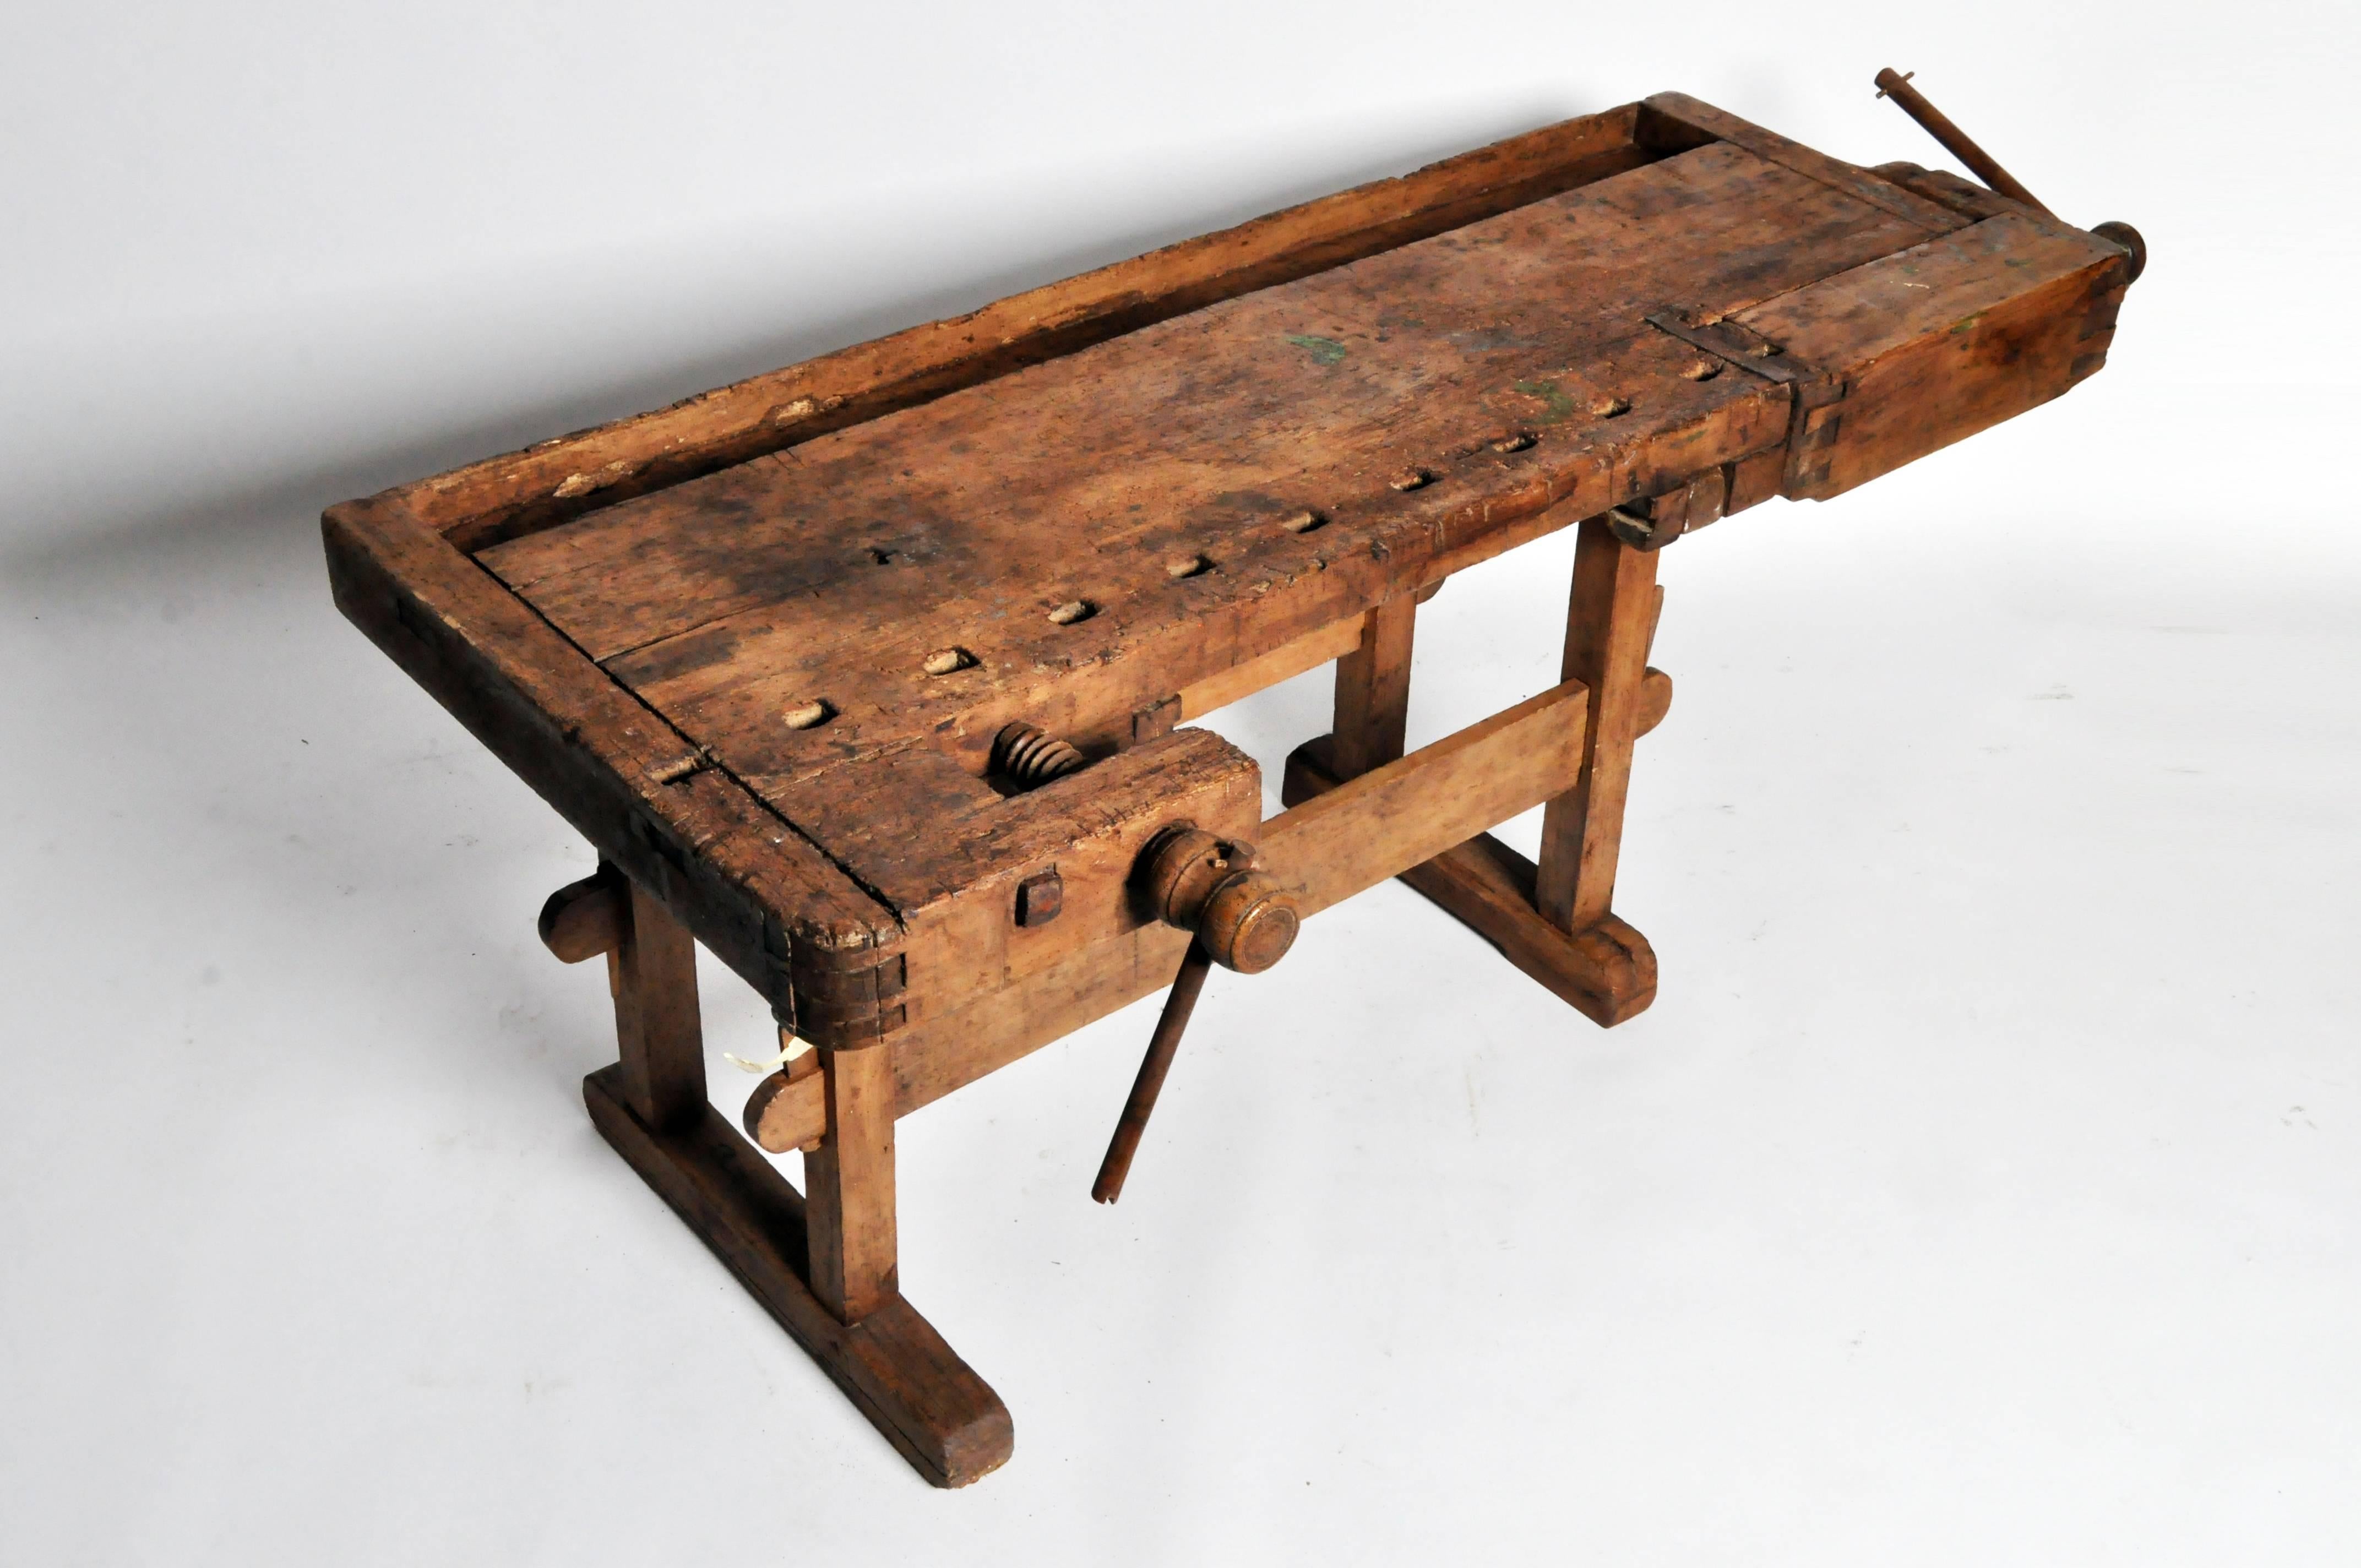 This handsome work bench is from Italy and is made from oak and pinewood, circa 1900. Features a beautiful aged patina.